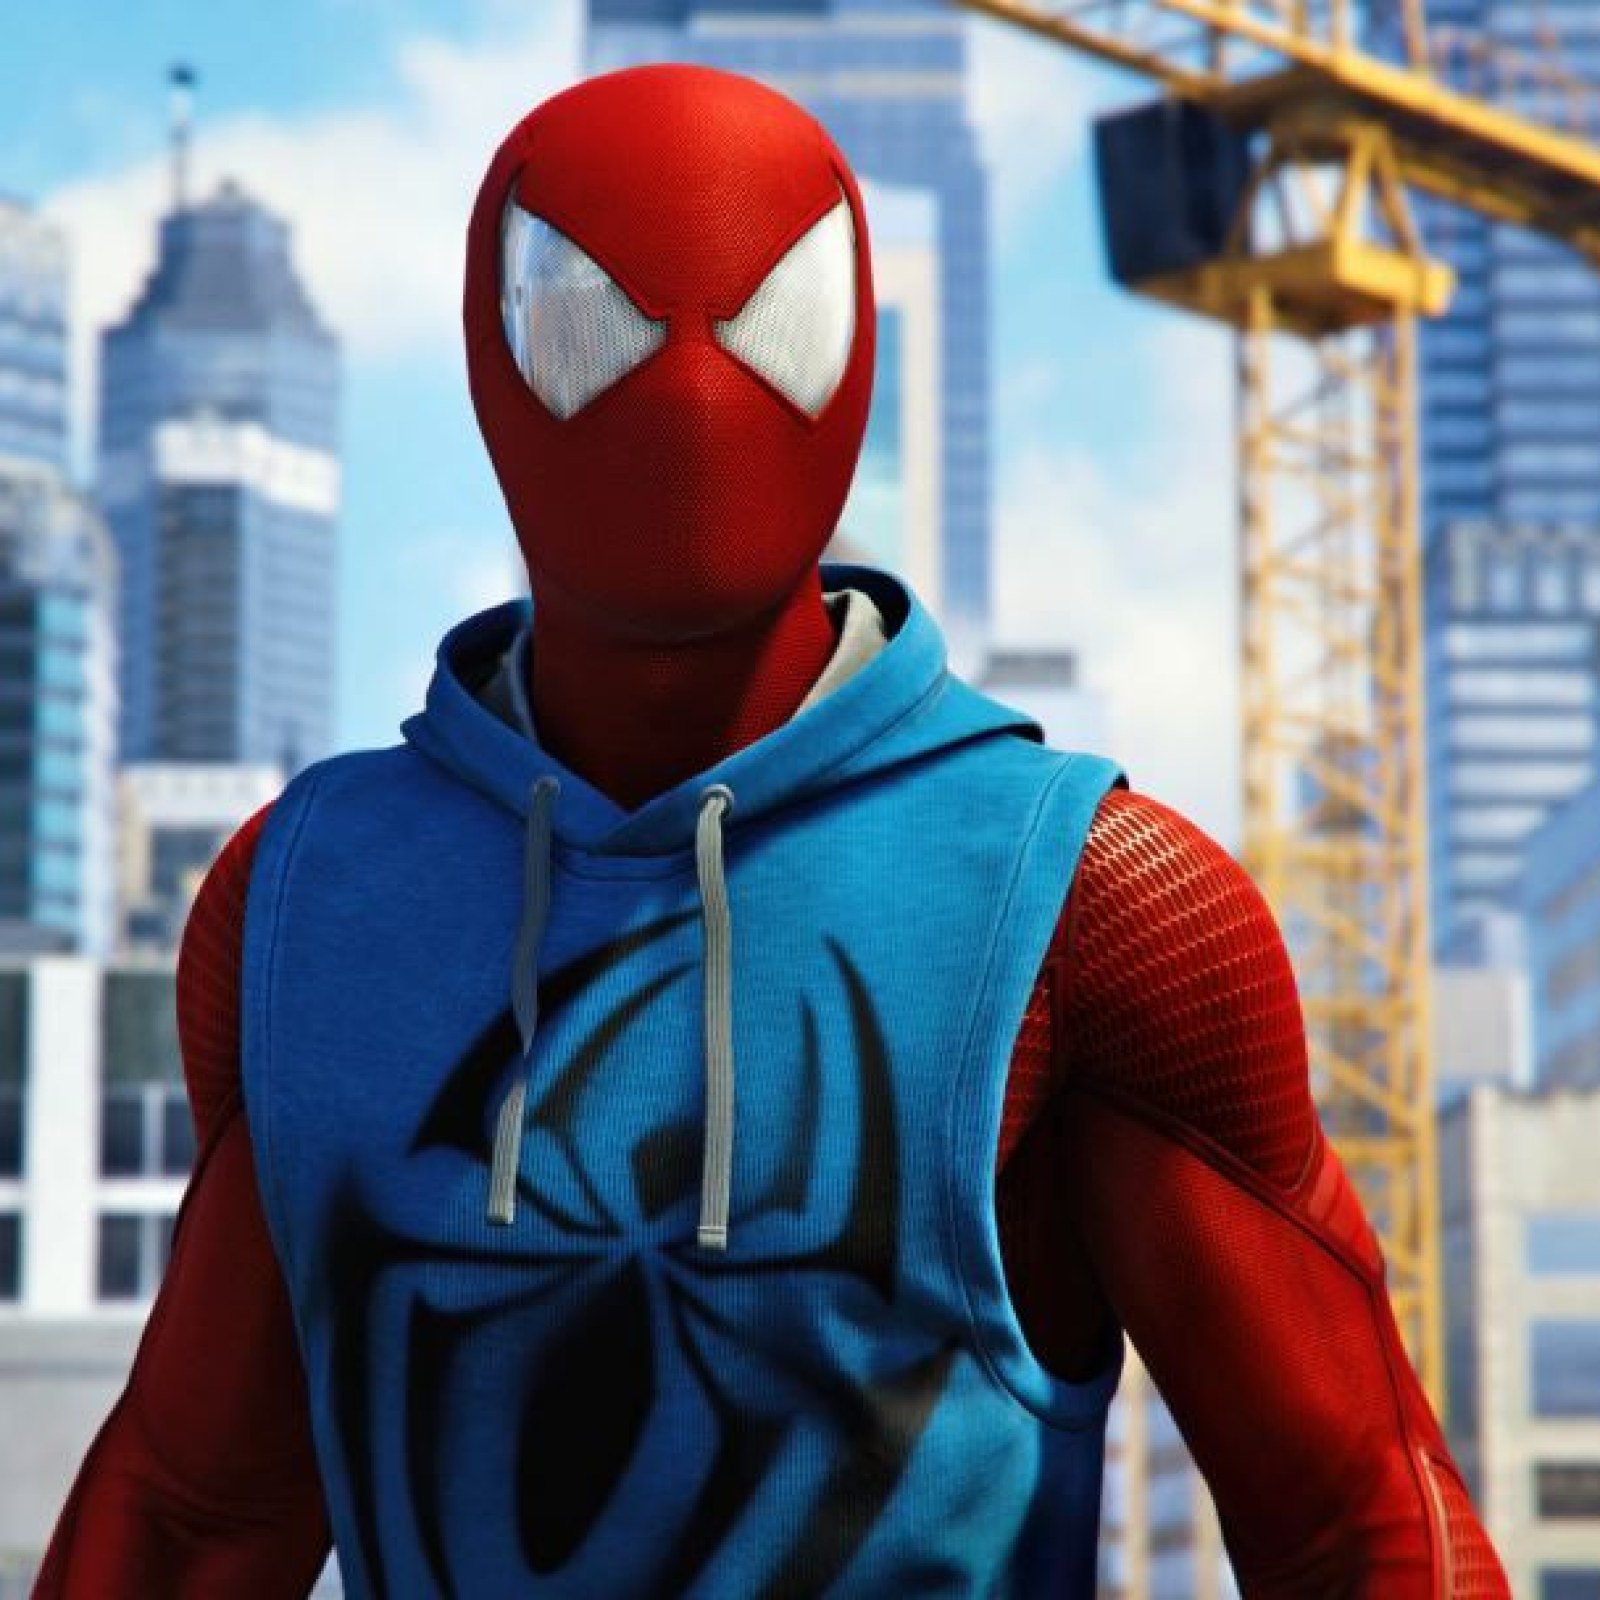 Spiderman' Suits: Every Costume and How to Get